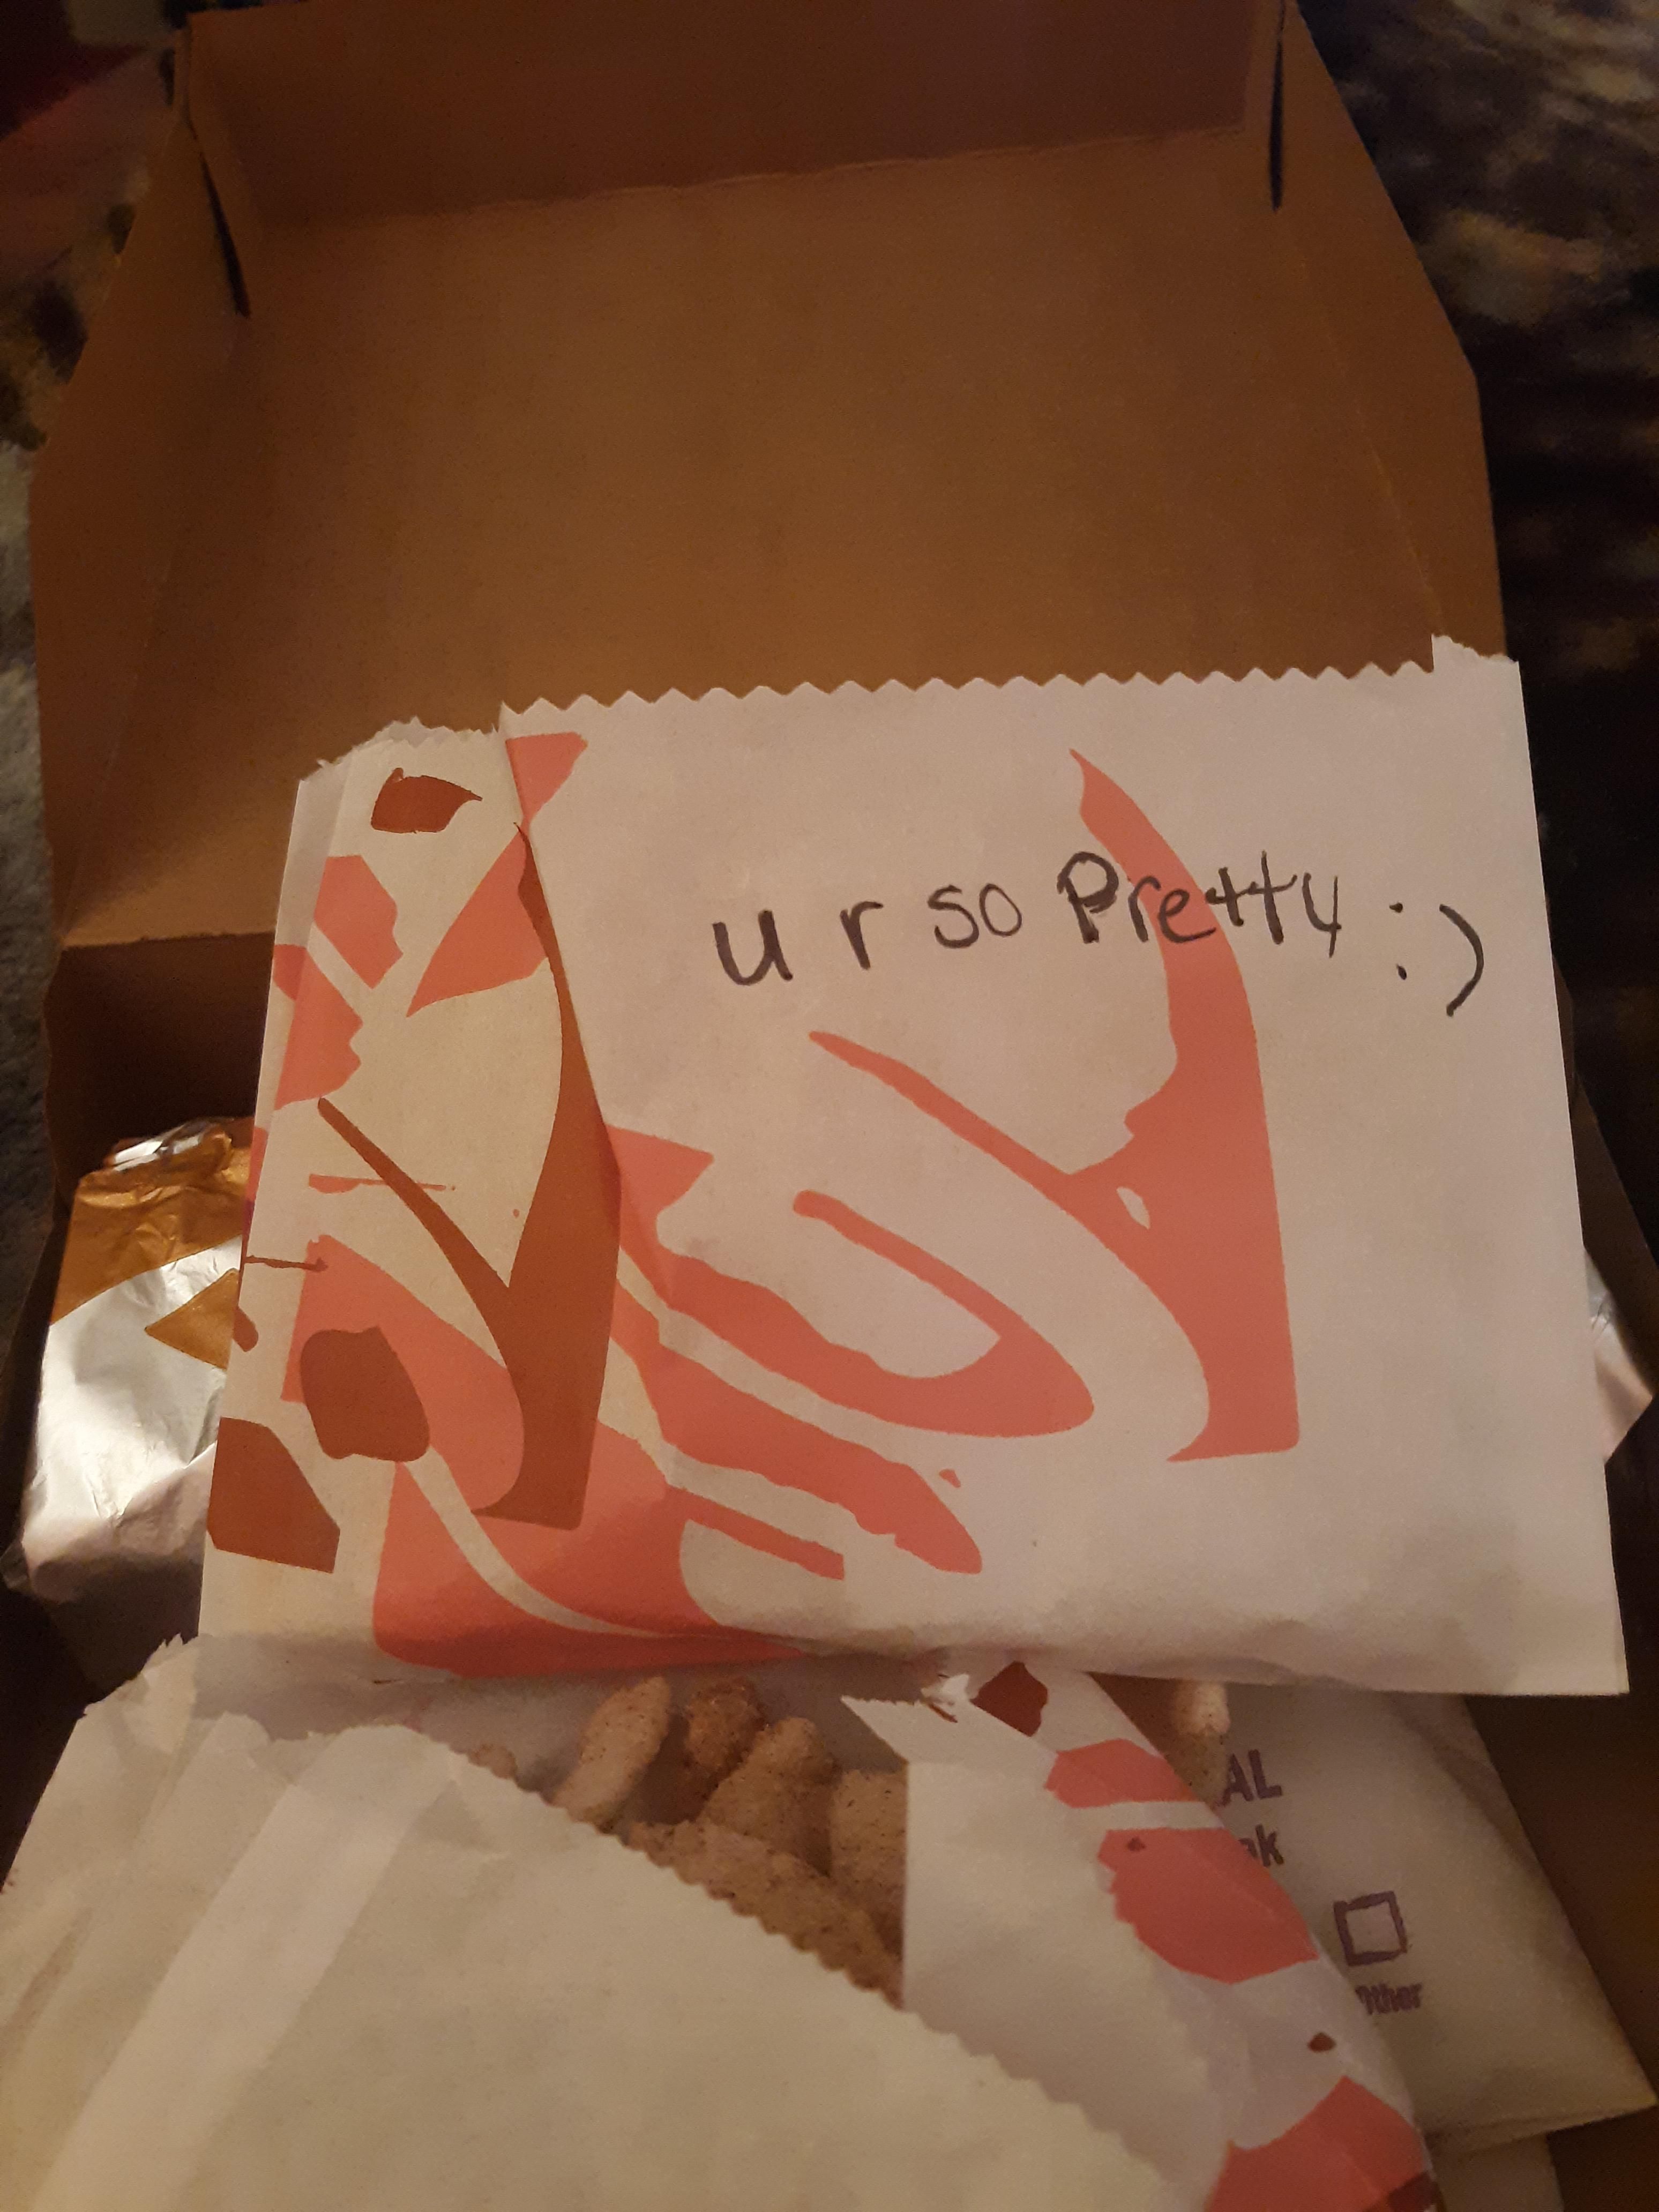 Somebody wrote this in my taco bell box. I'm a big burly guy. I dont know how to feel.